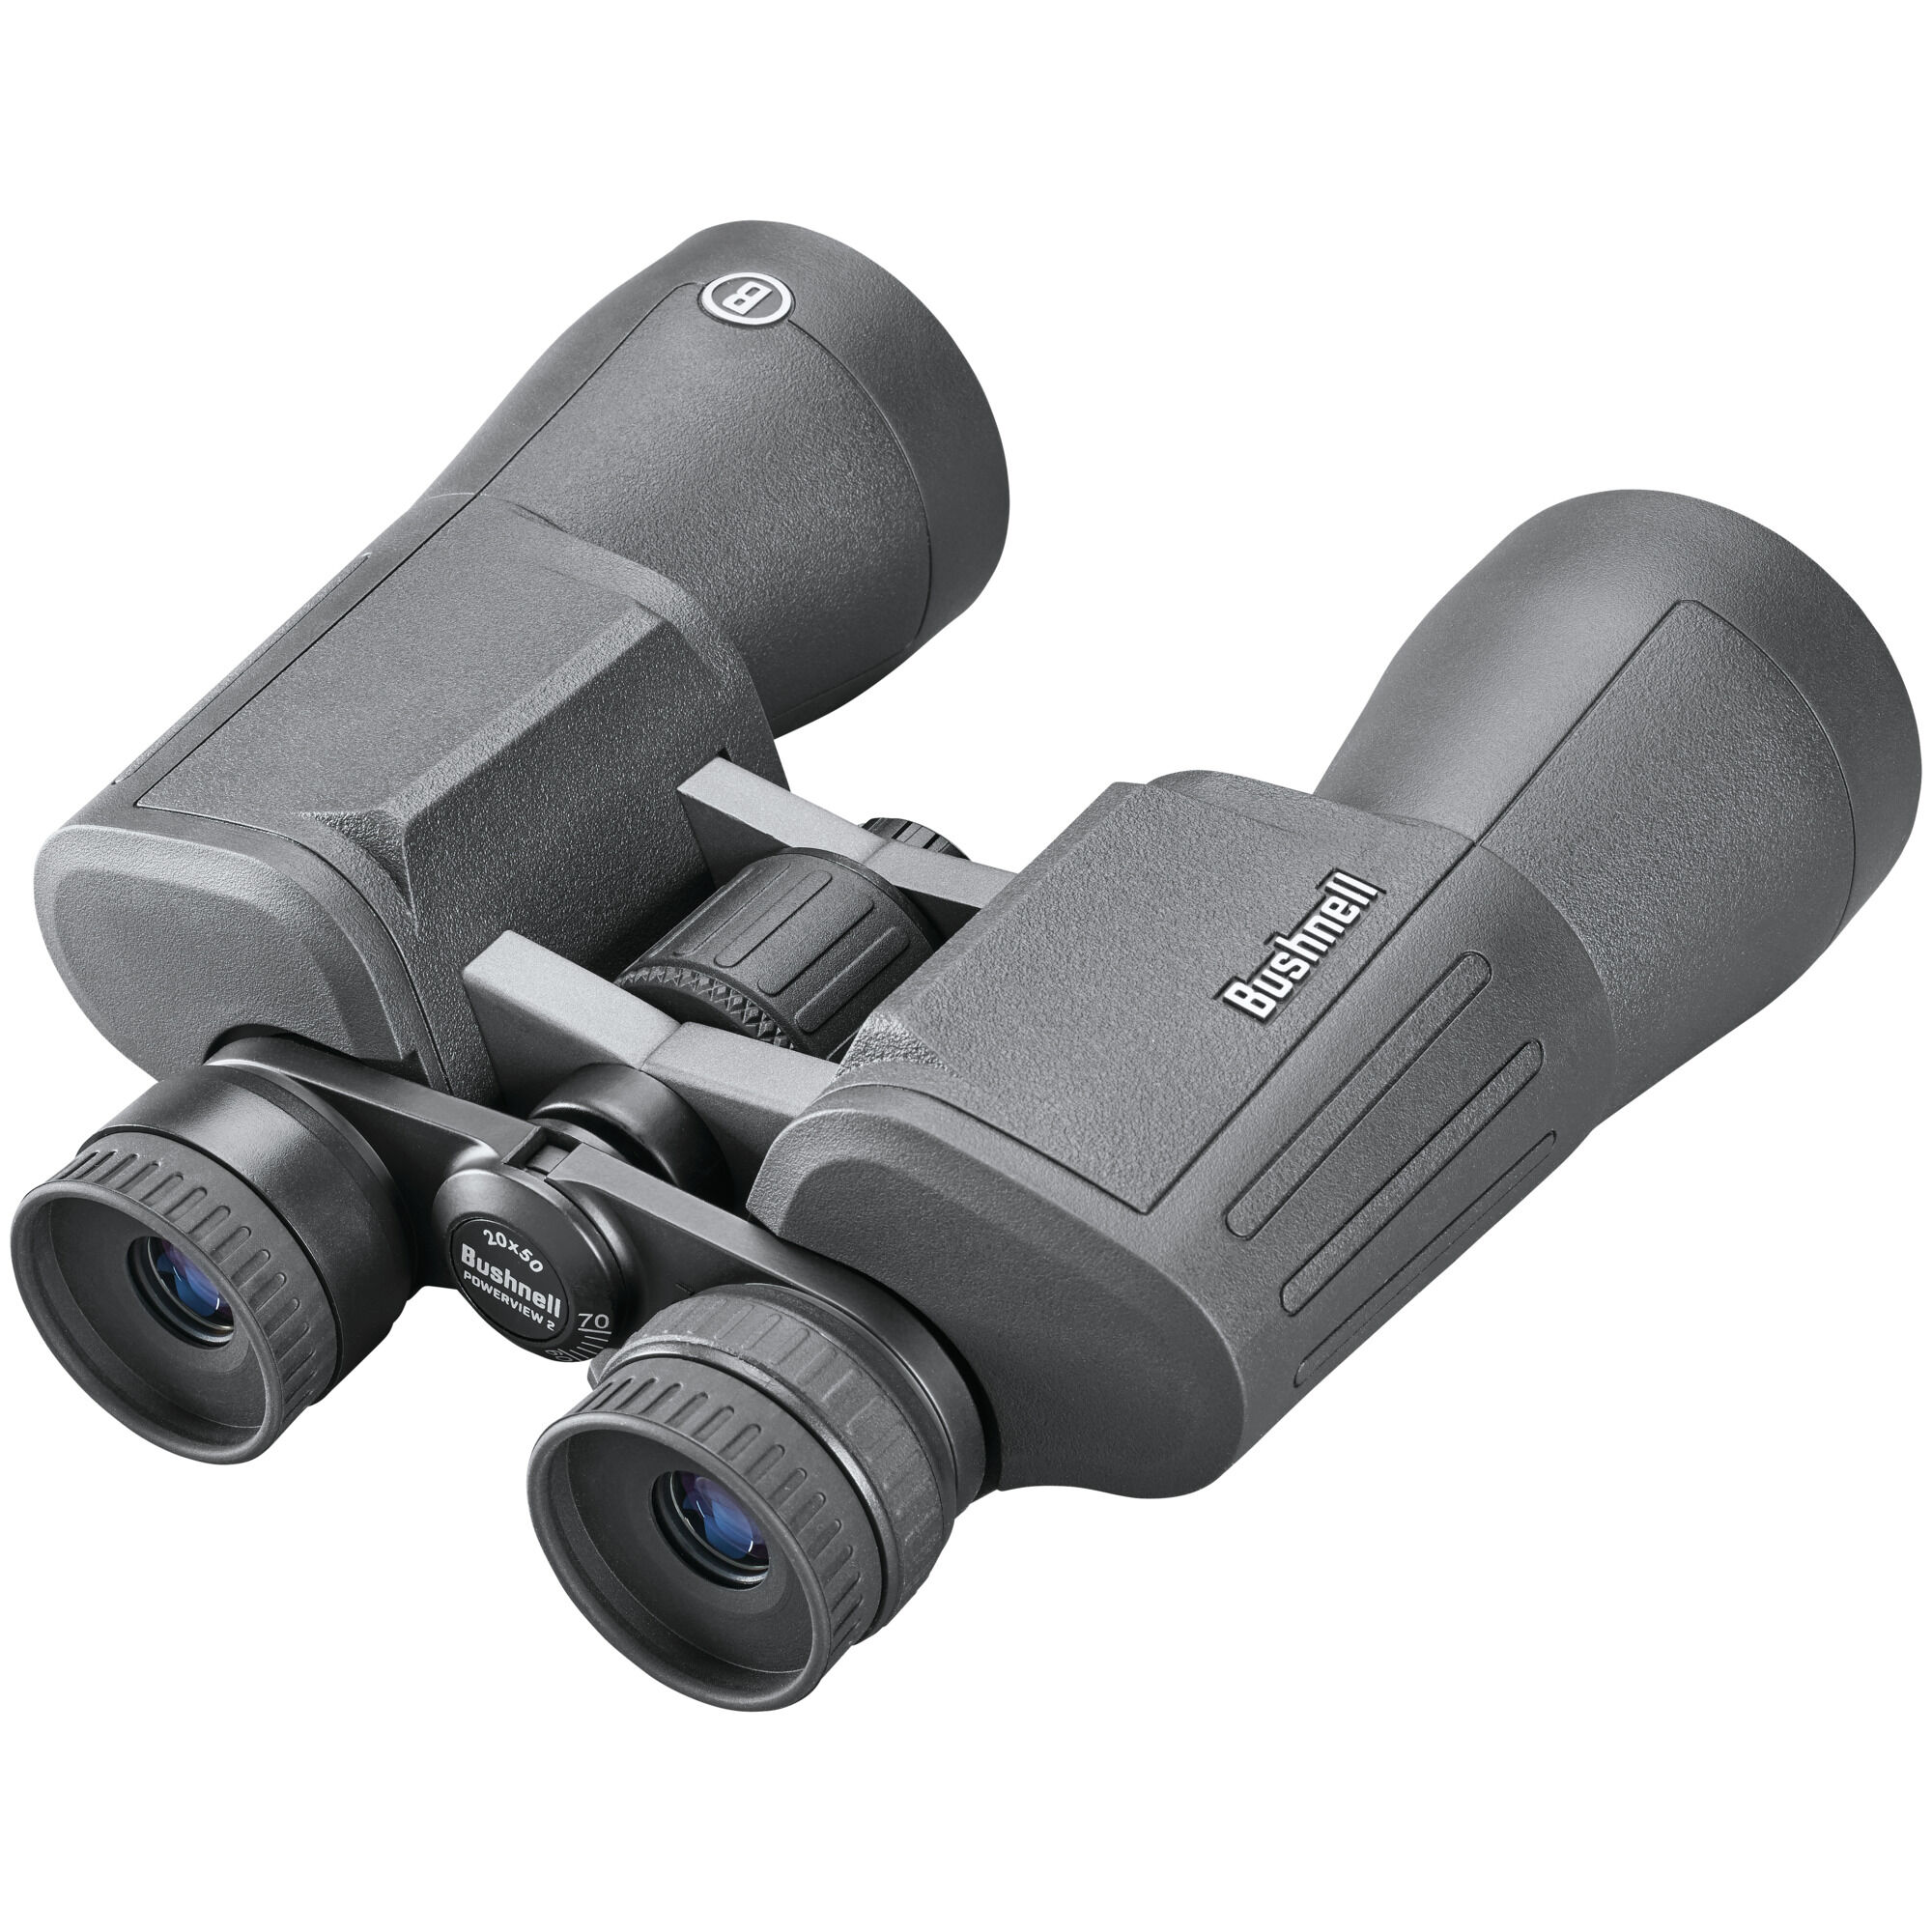 Bushnell PowerView 2 20x50mm Aluminum Metal Chassis Rubber Armor Binoculars 